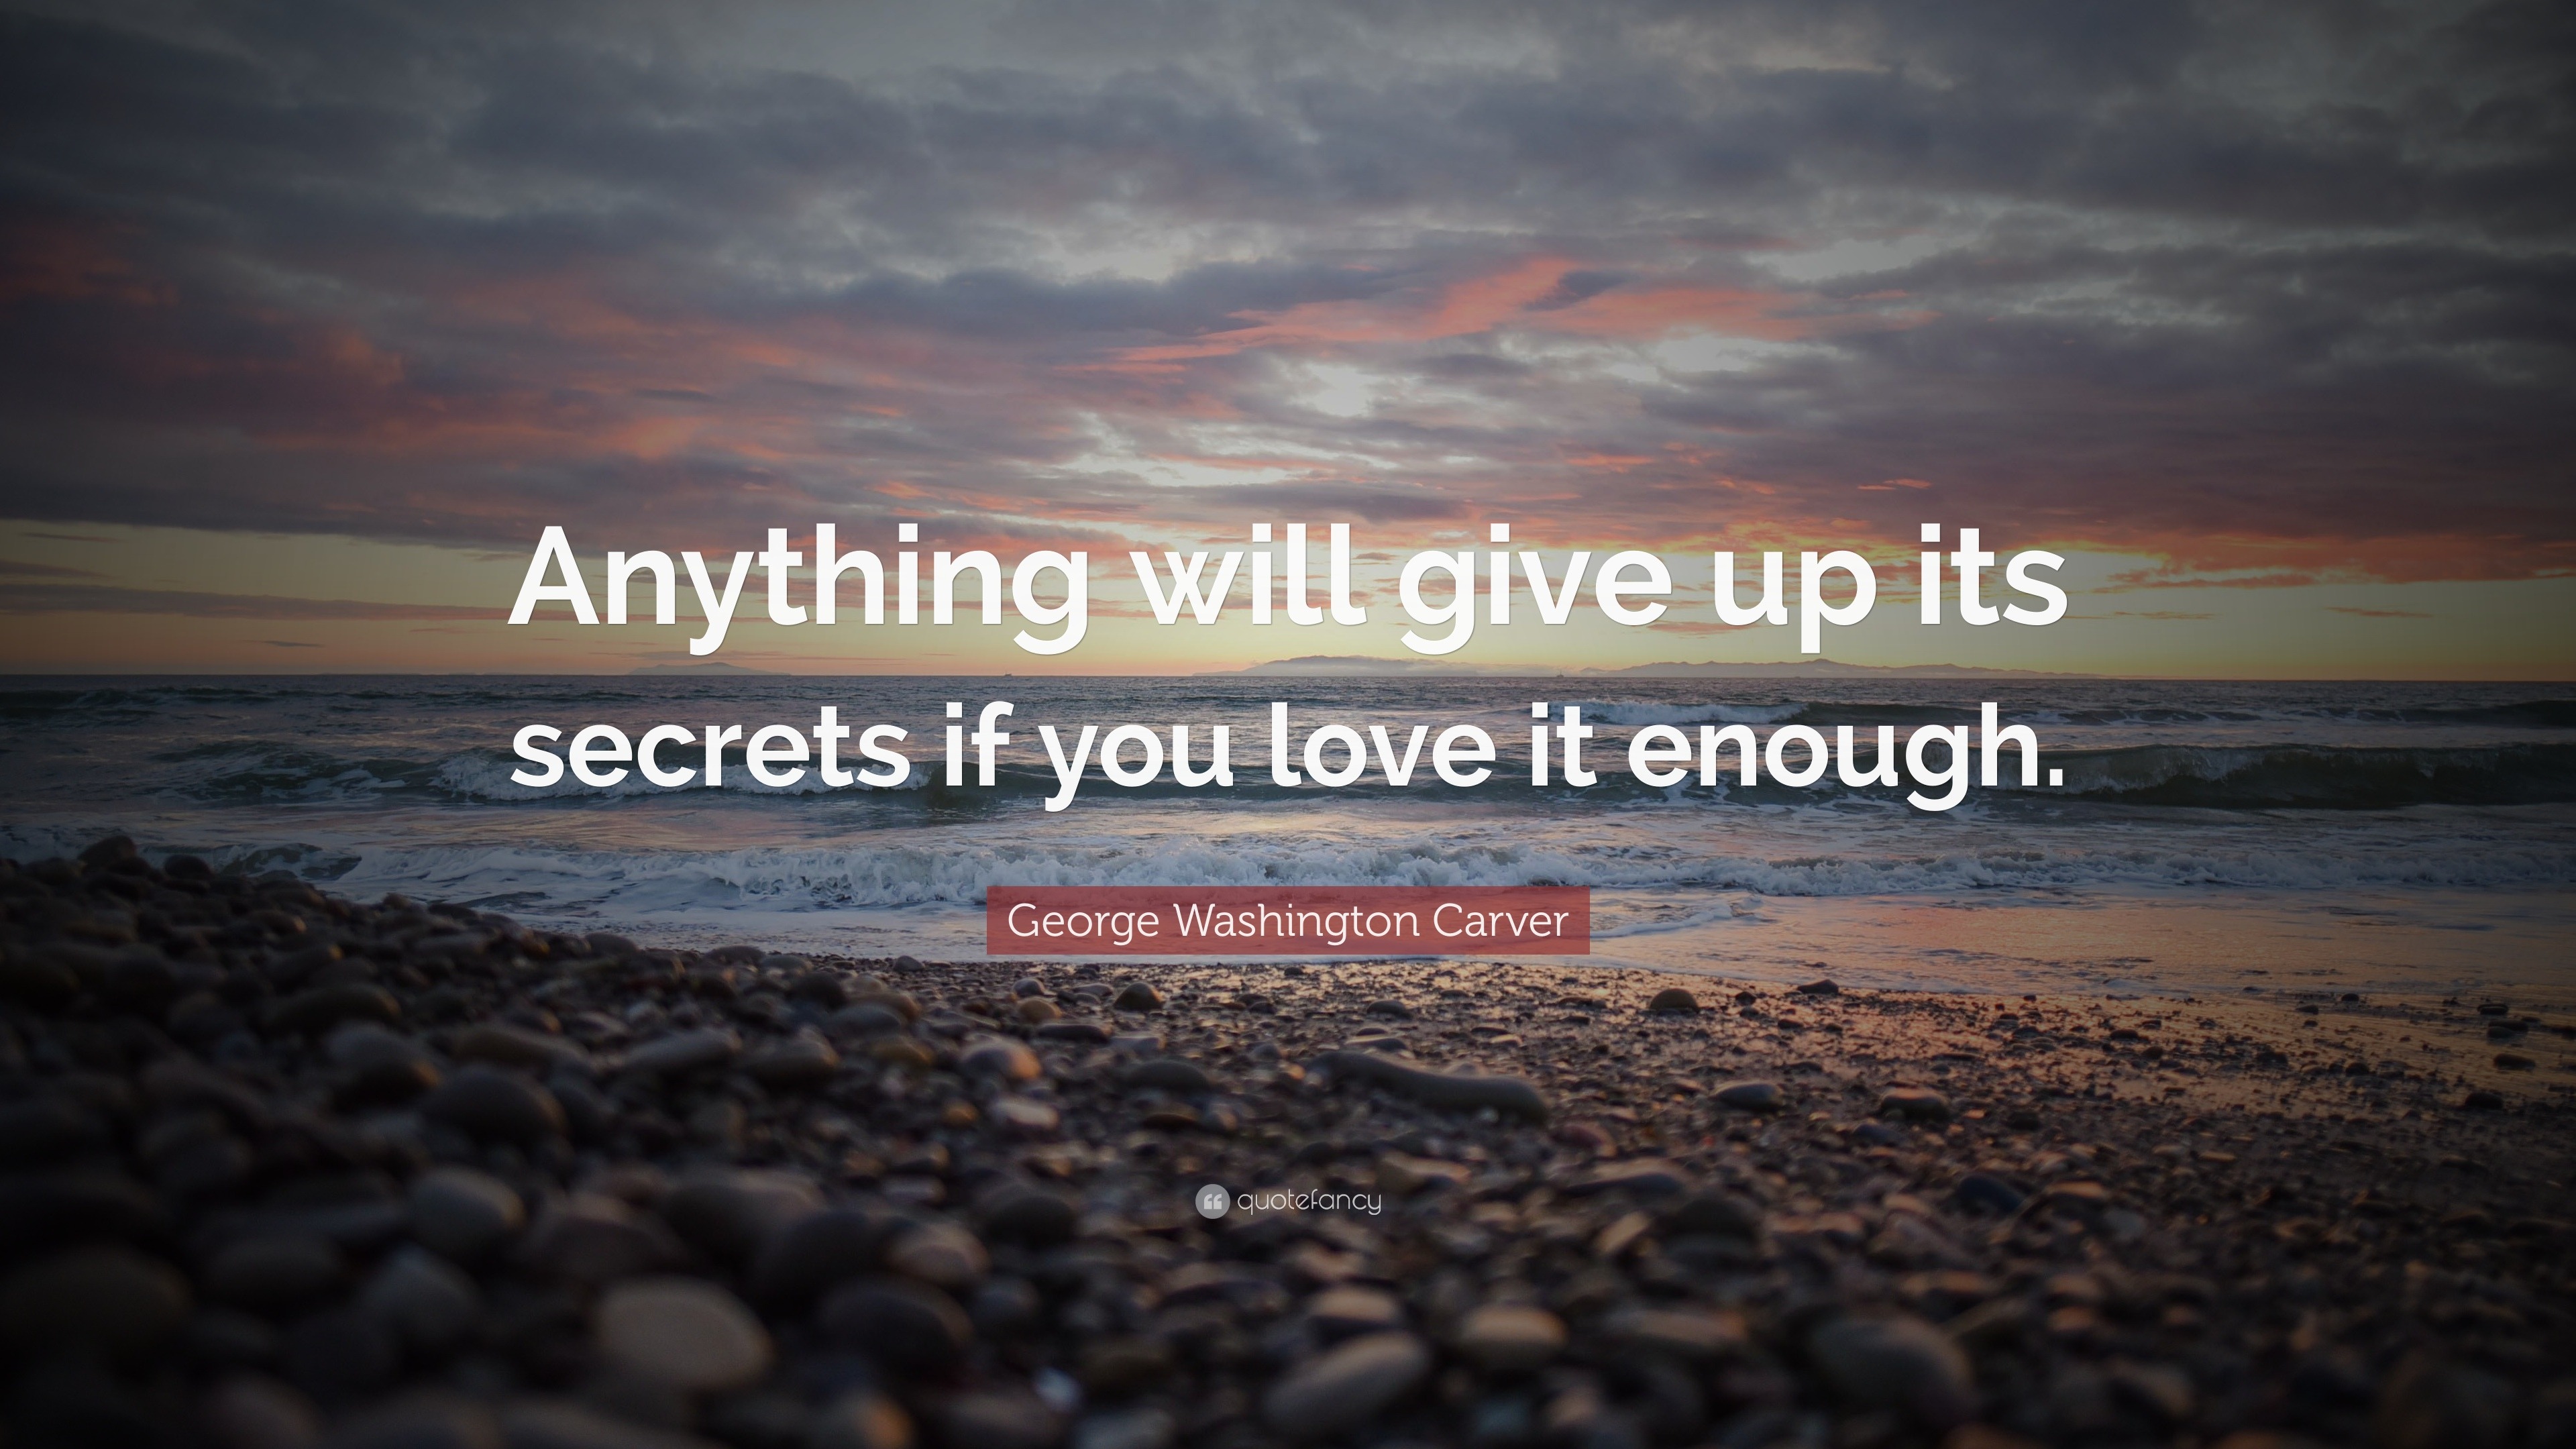 George Washington Carver Quote “Anything will give up its secrets if you love it